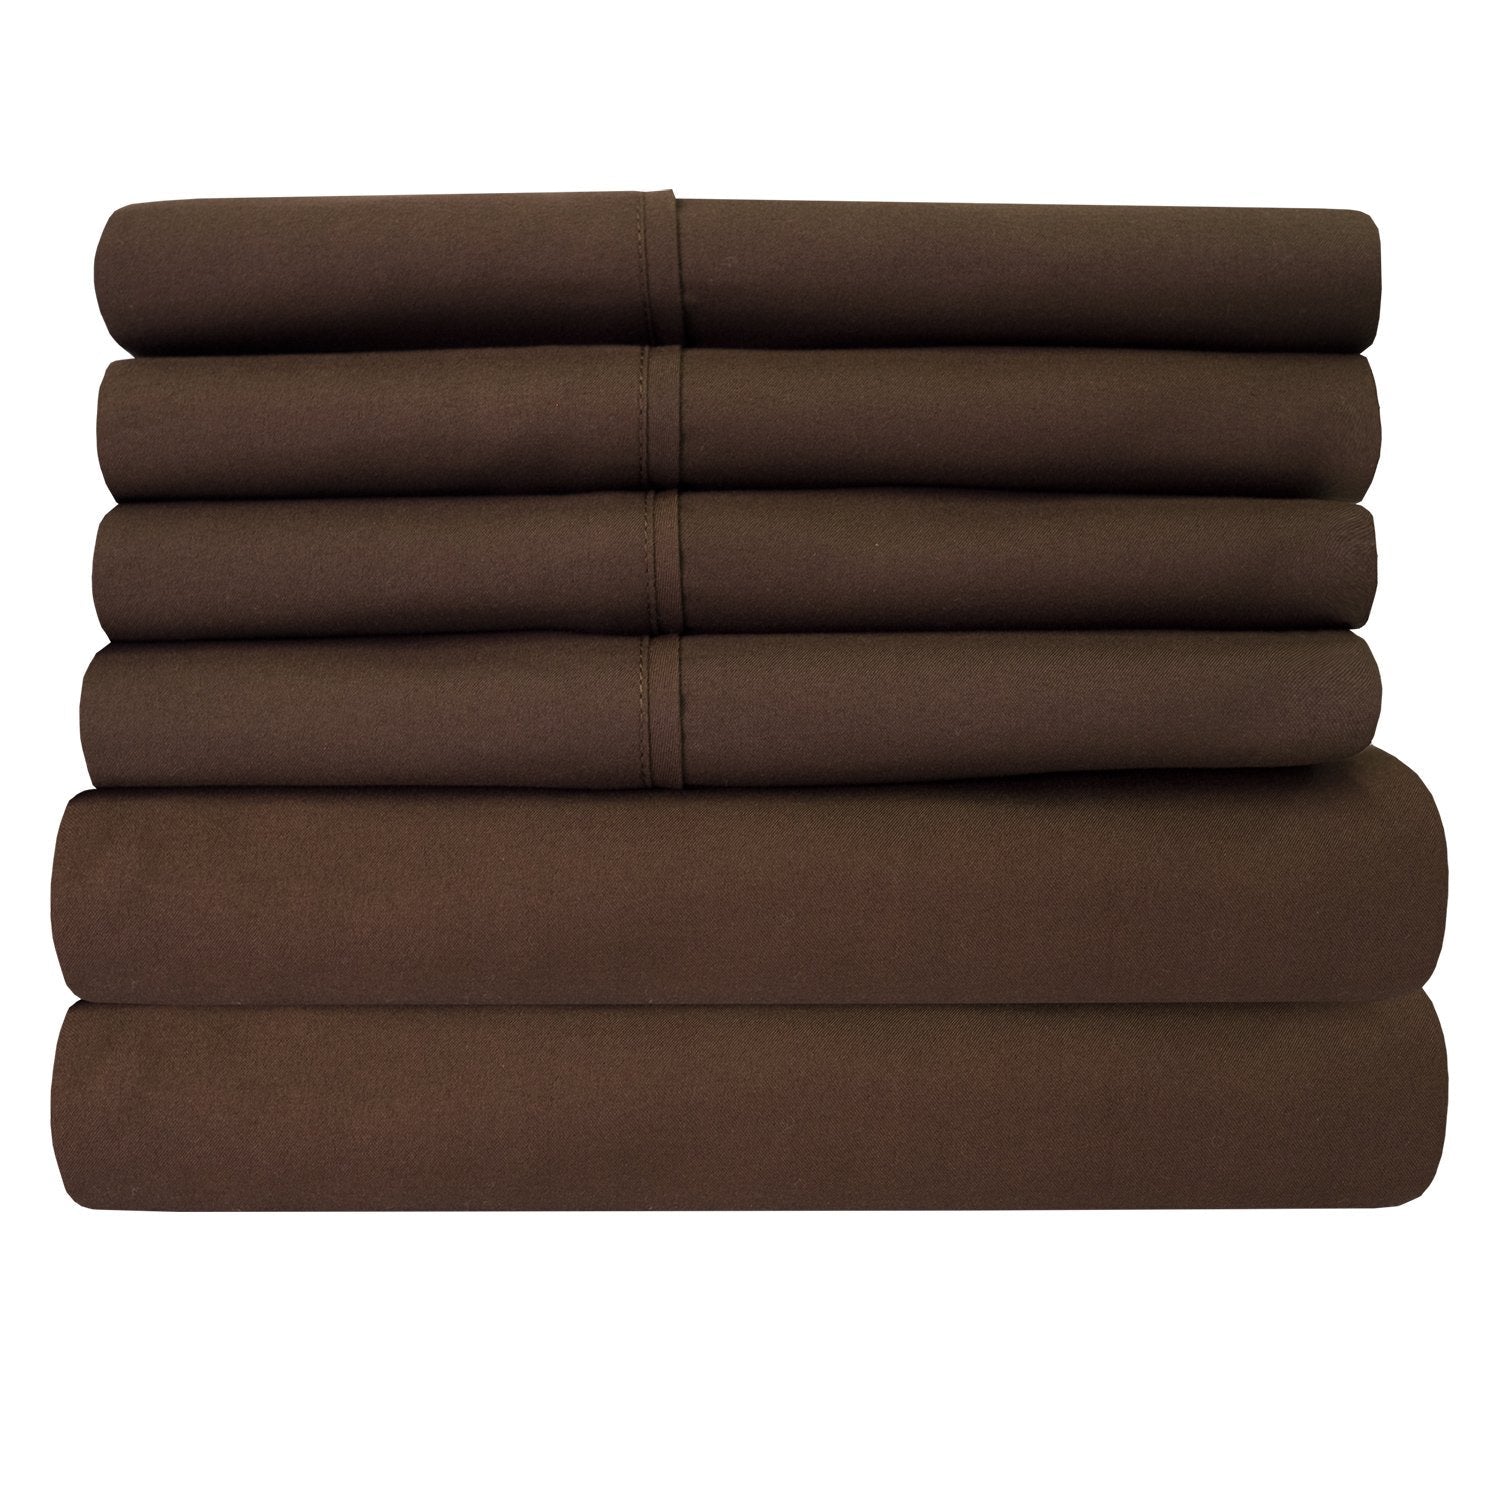 Deluxe 6-Piece Bed Sheet Set (Chocolate) - Folded 2